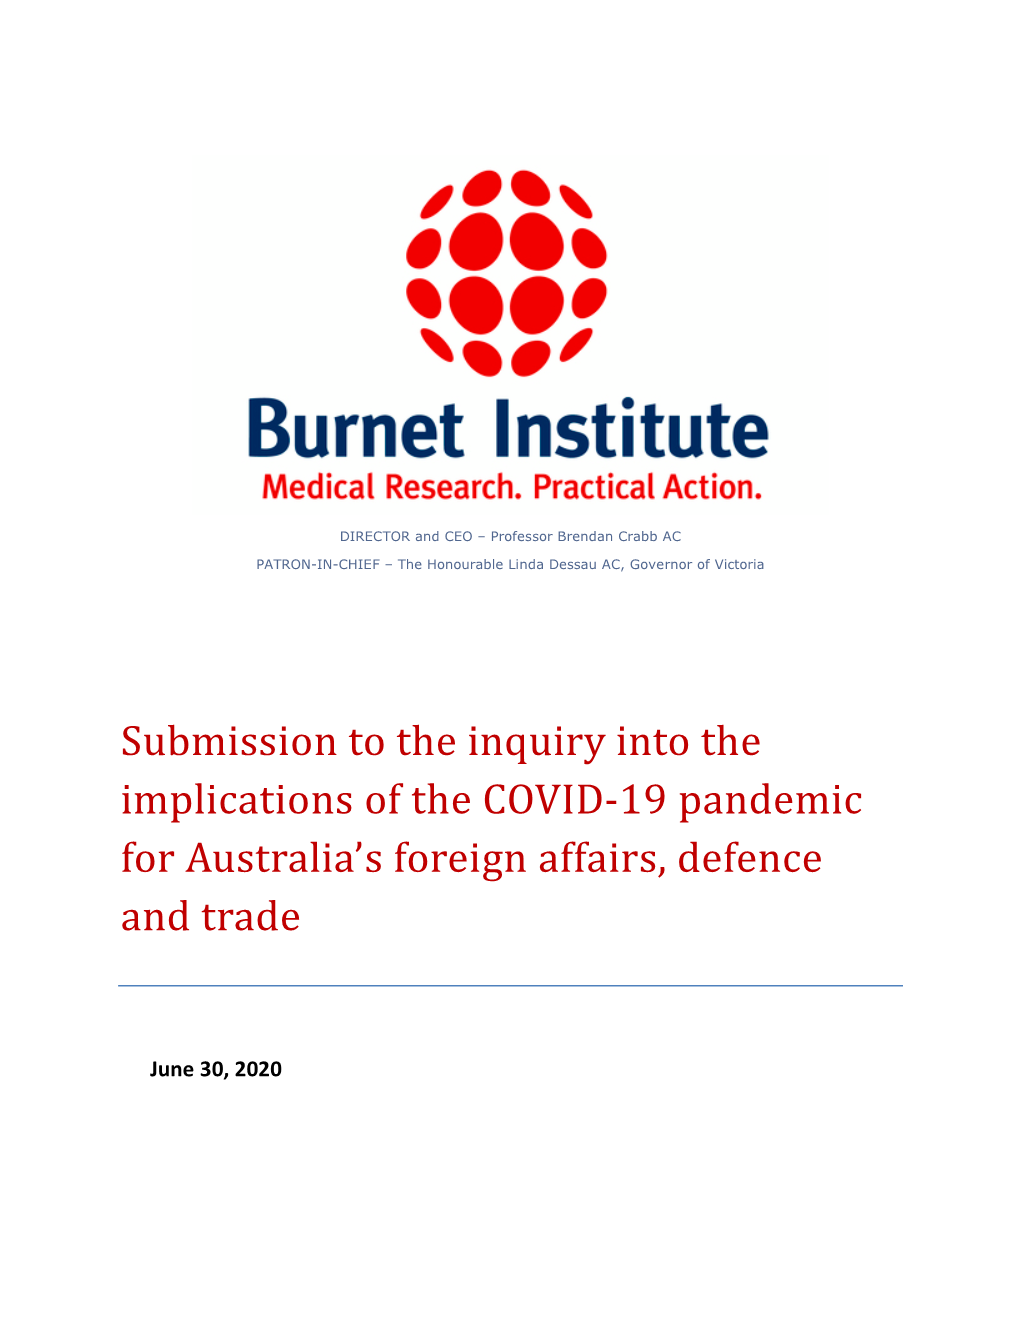 Submission to the Inquiry Into the Implications of the COVID-19 Pandemic for Australia's Foreign Affairs, Defence and Trade